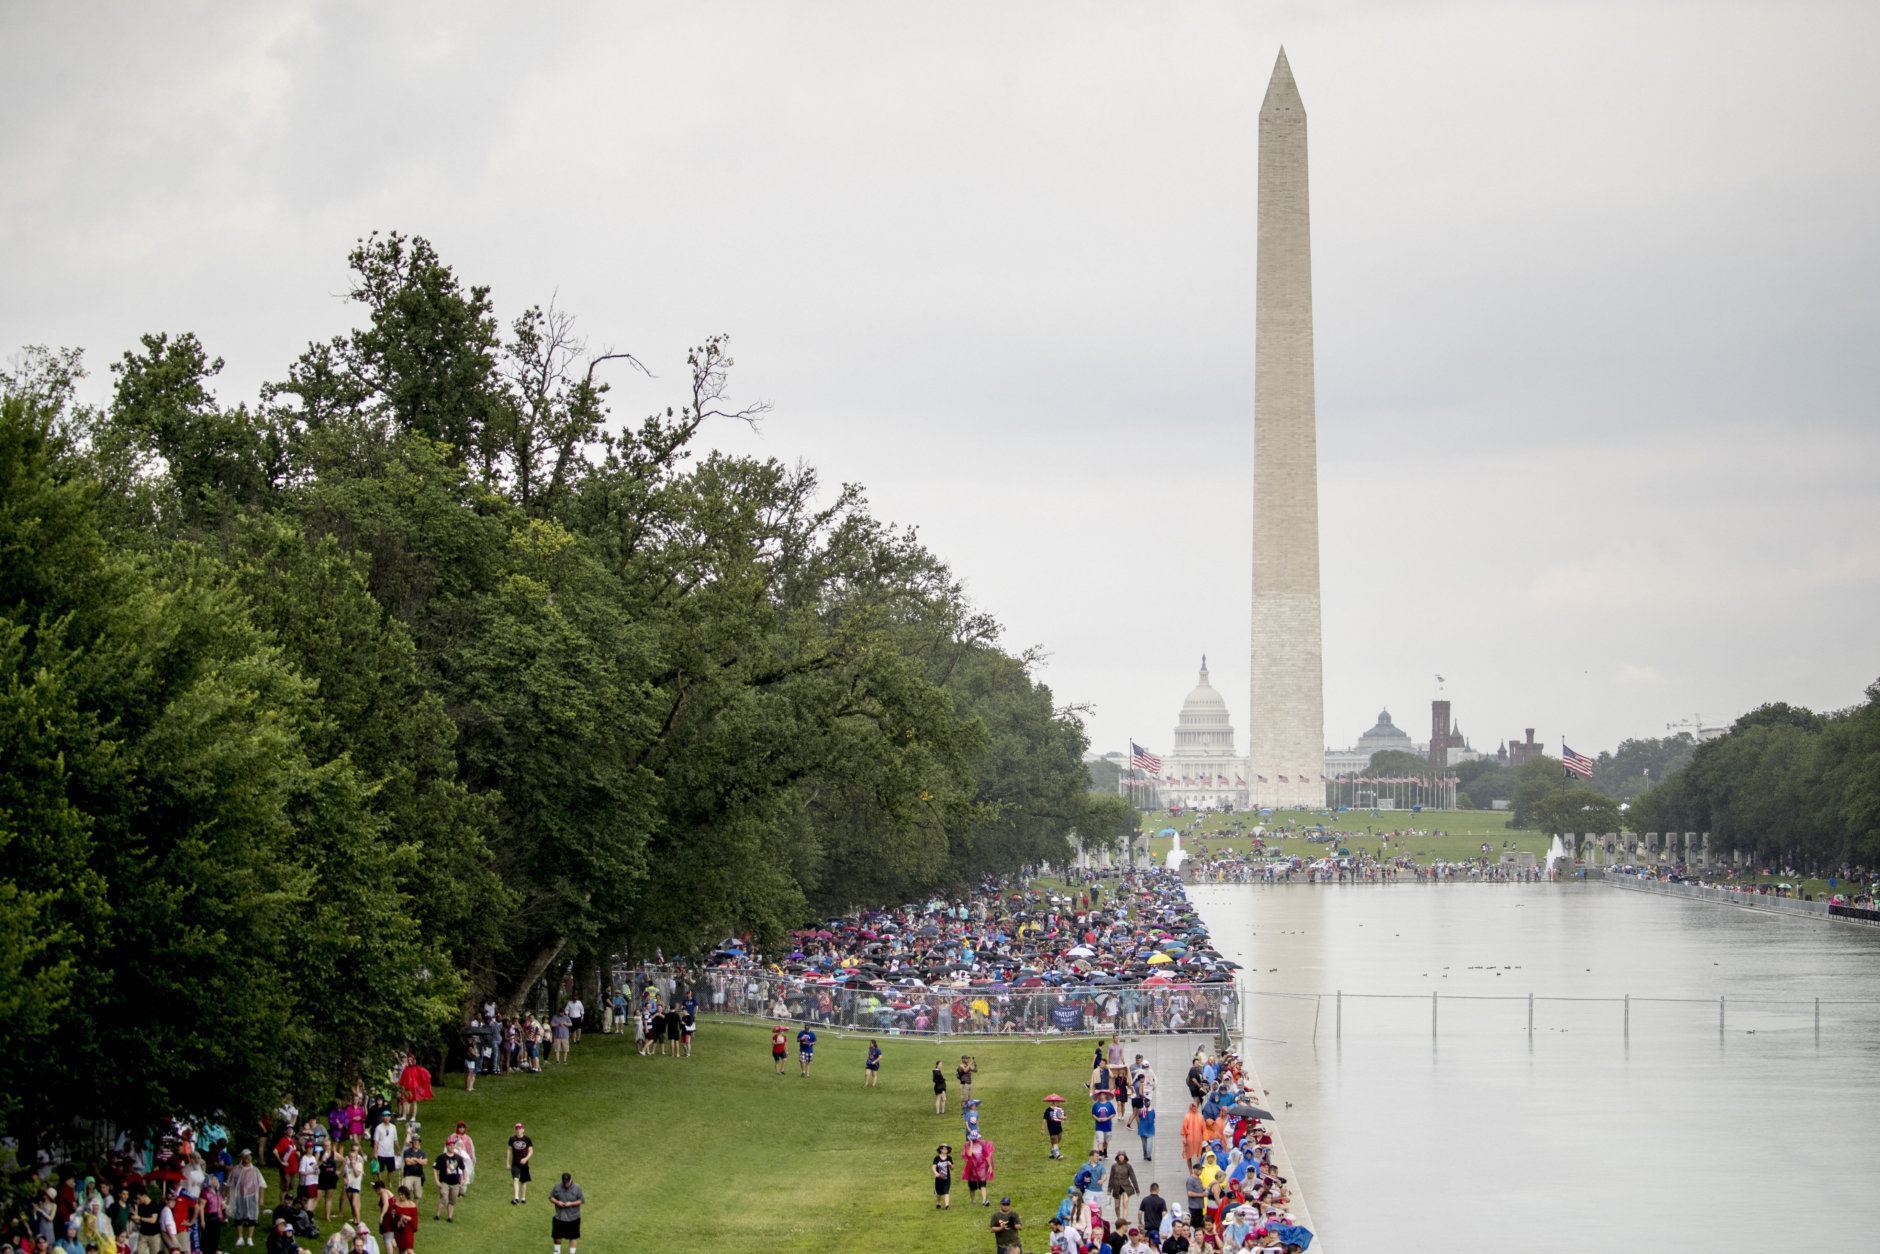 Crowds gather in the rain along the Reflecting Pool before President Donald Trump's 'Salute to America' event honoring service branches on Independence Day, Thursday, July 4, 2019, in Washington. President Donald Trump is promising military tanks along with "Incredible Flyovers &amp; biggest ever Fireworks!" for the Fourth of July. (AP Photo/Andrew Harnik)